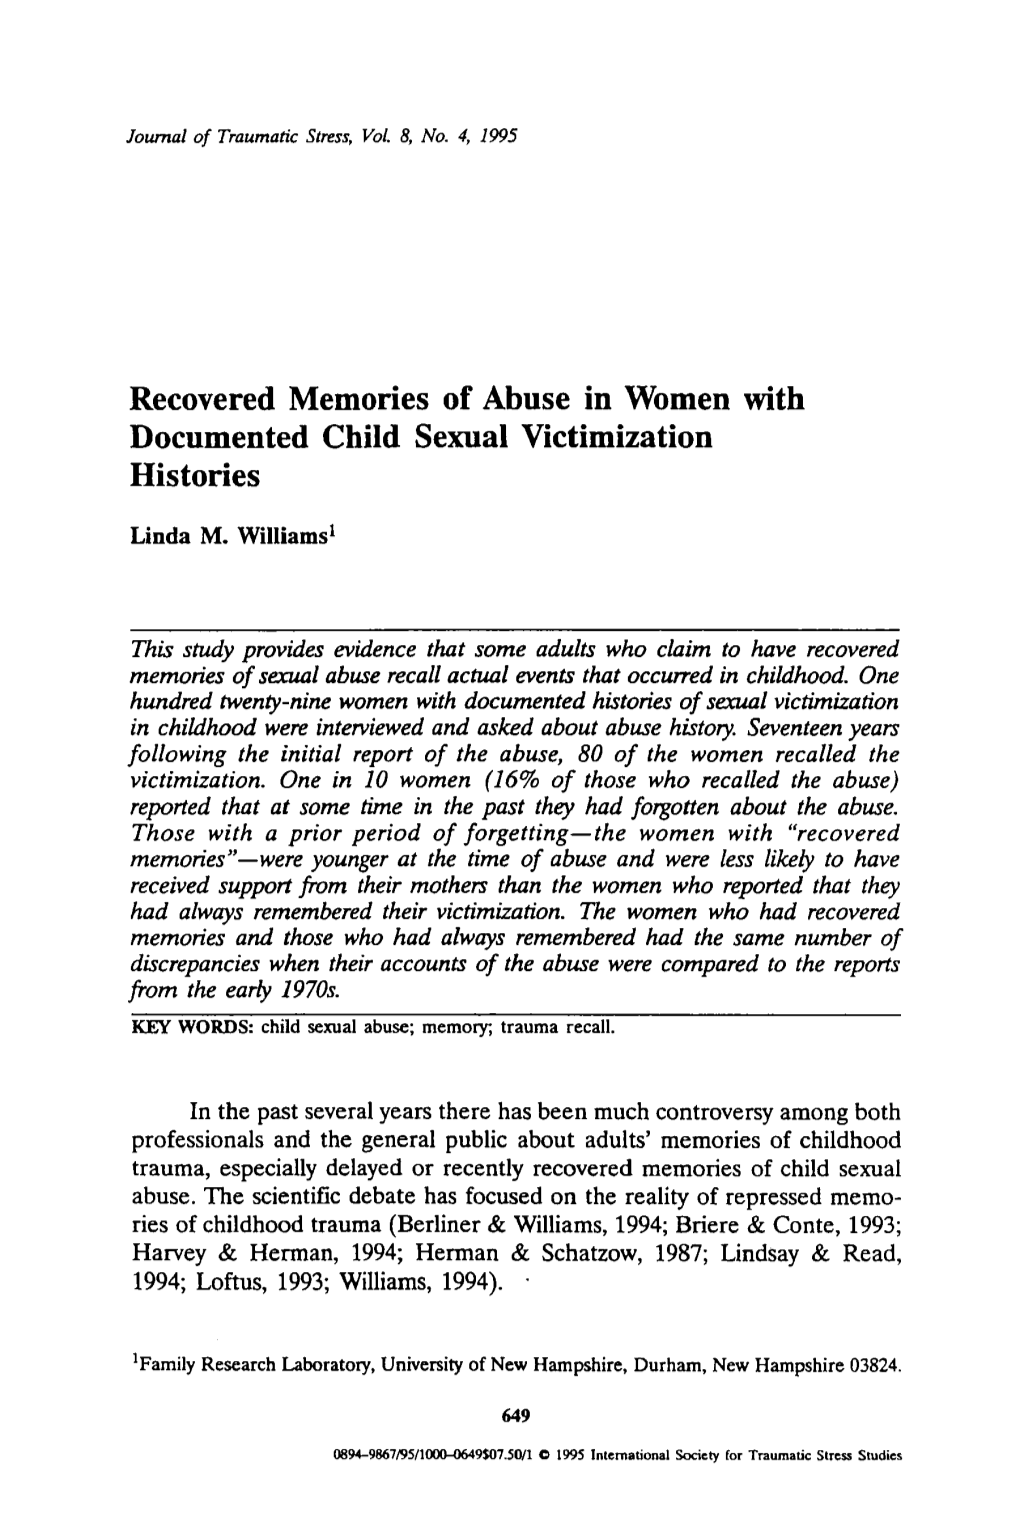 Recovered Memories of Abuse in Women with Documented Child Sexual Victimization Histories